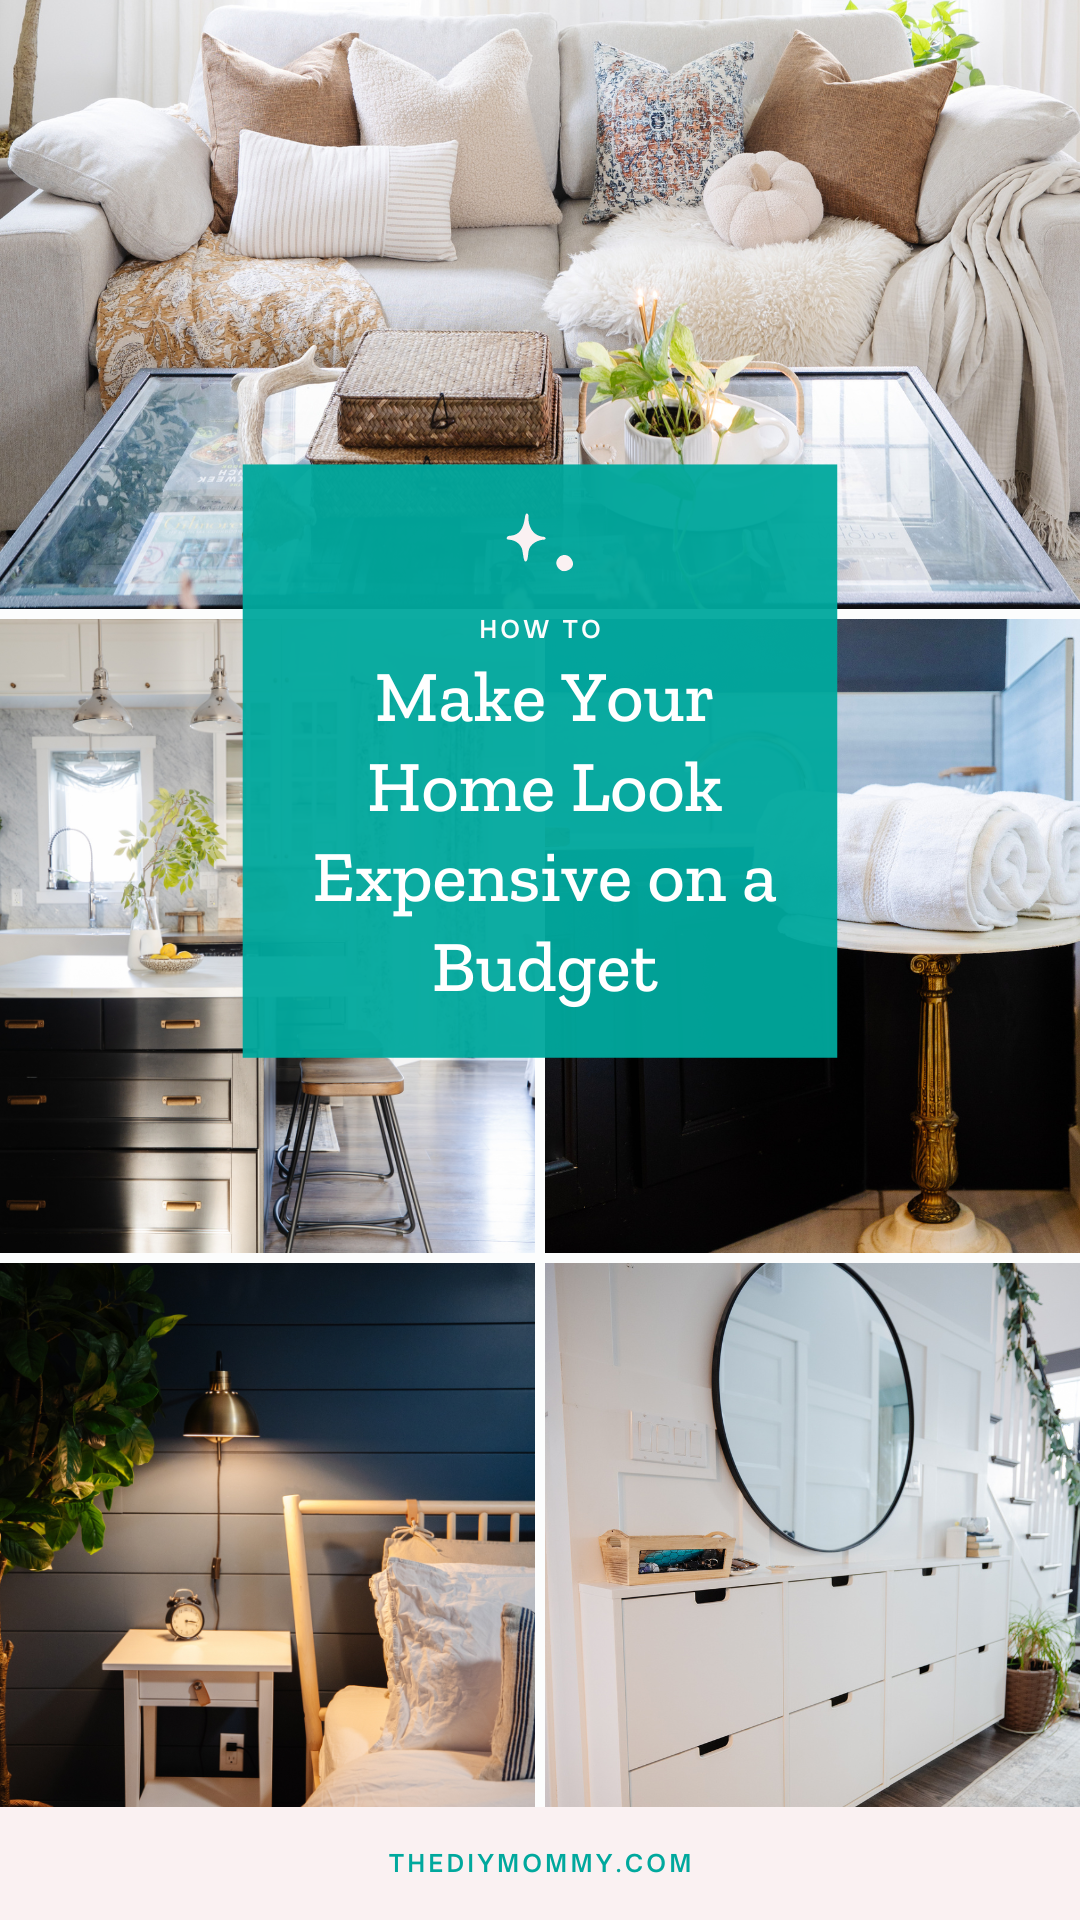 25 Ways to Make Your Home Look Expensive on a Budget